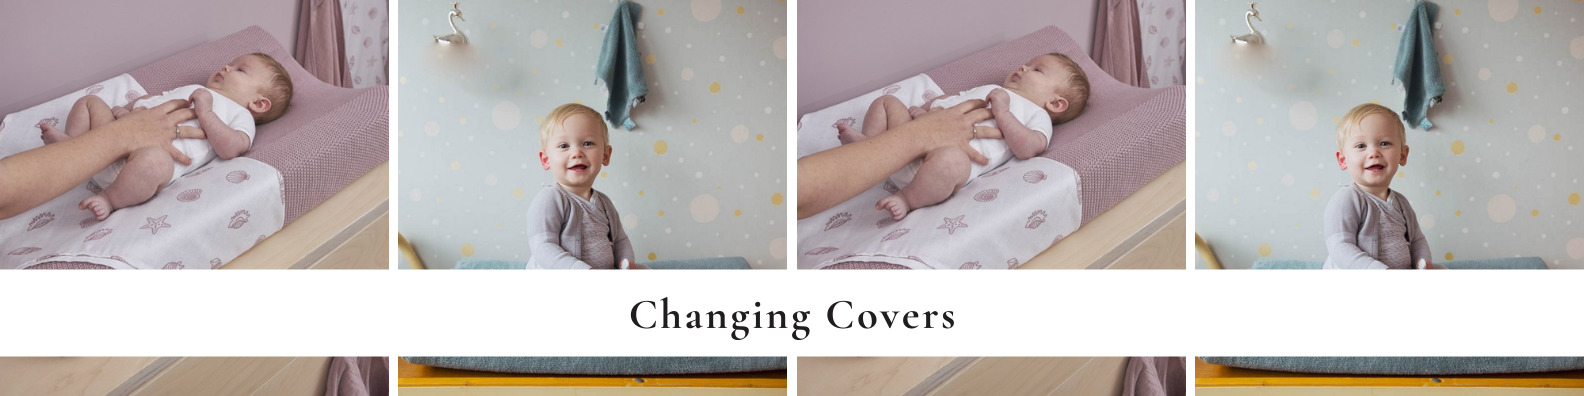 Changing Covers